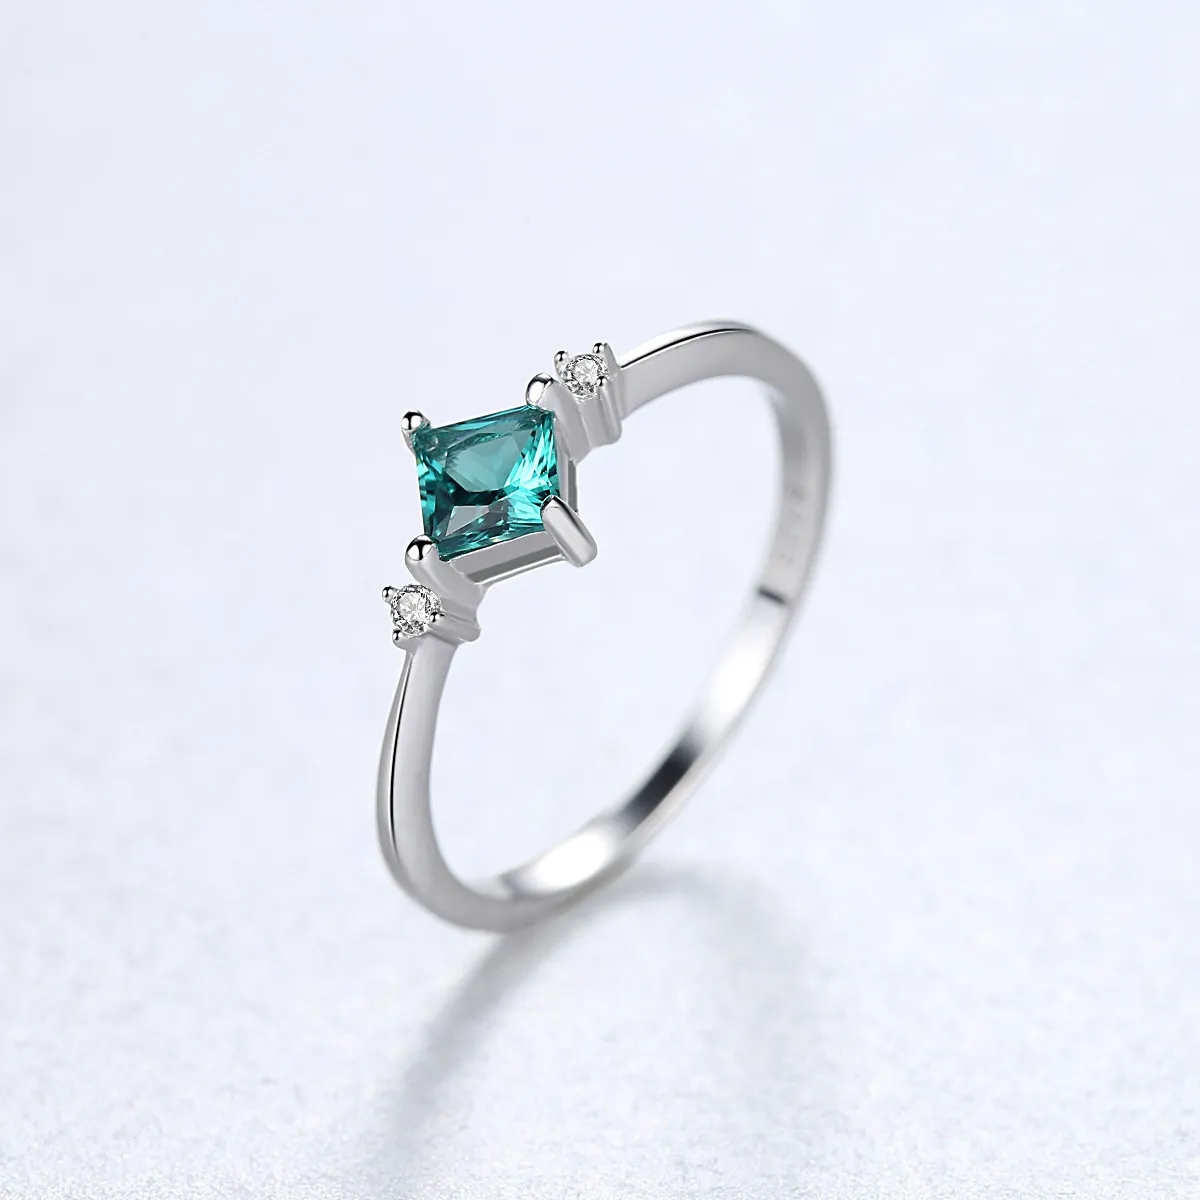 S925 Sterling Silver Ring Vintage Emerald Brand Ring Designer Ring European Fashion Women Ring Wedding Party Ring Jewelry Valentine's Day Mother's Day Gift spc